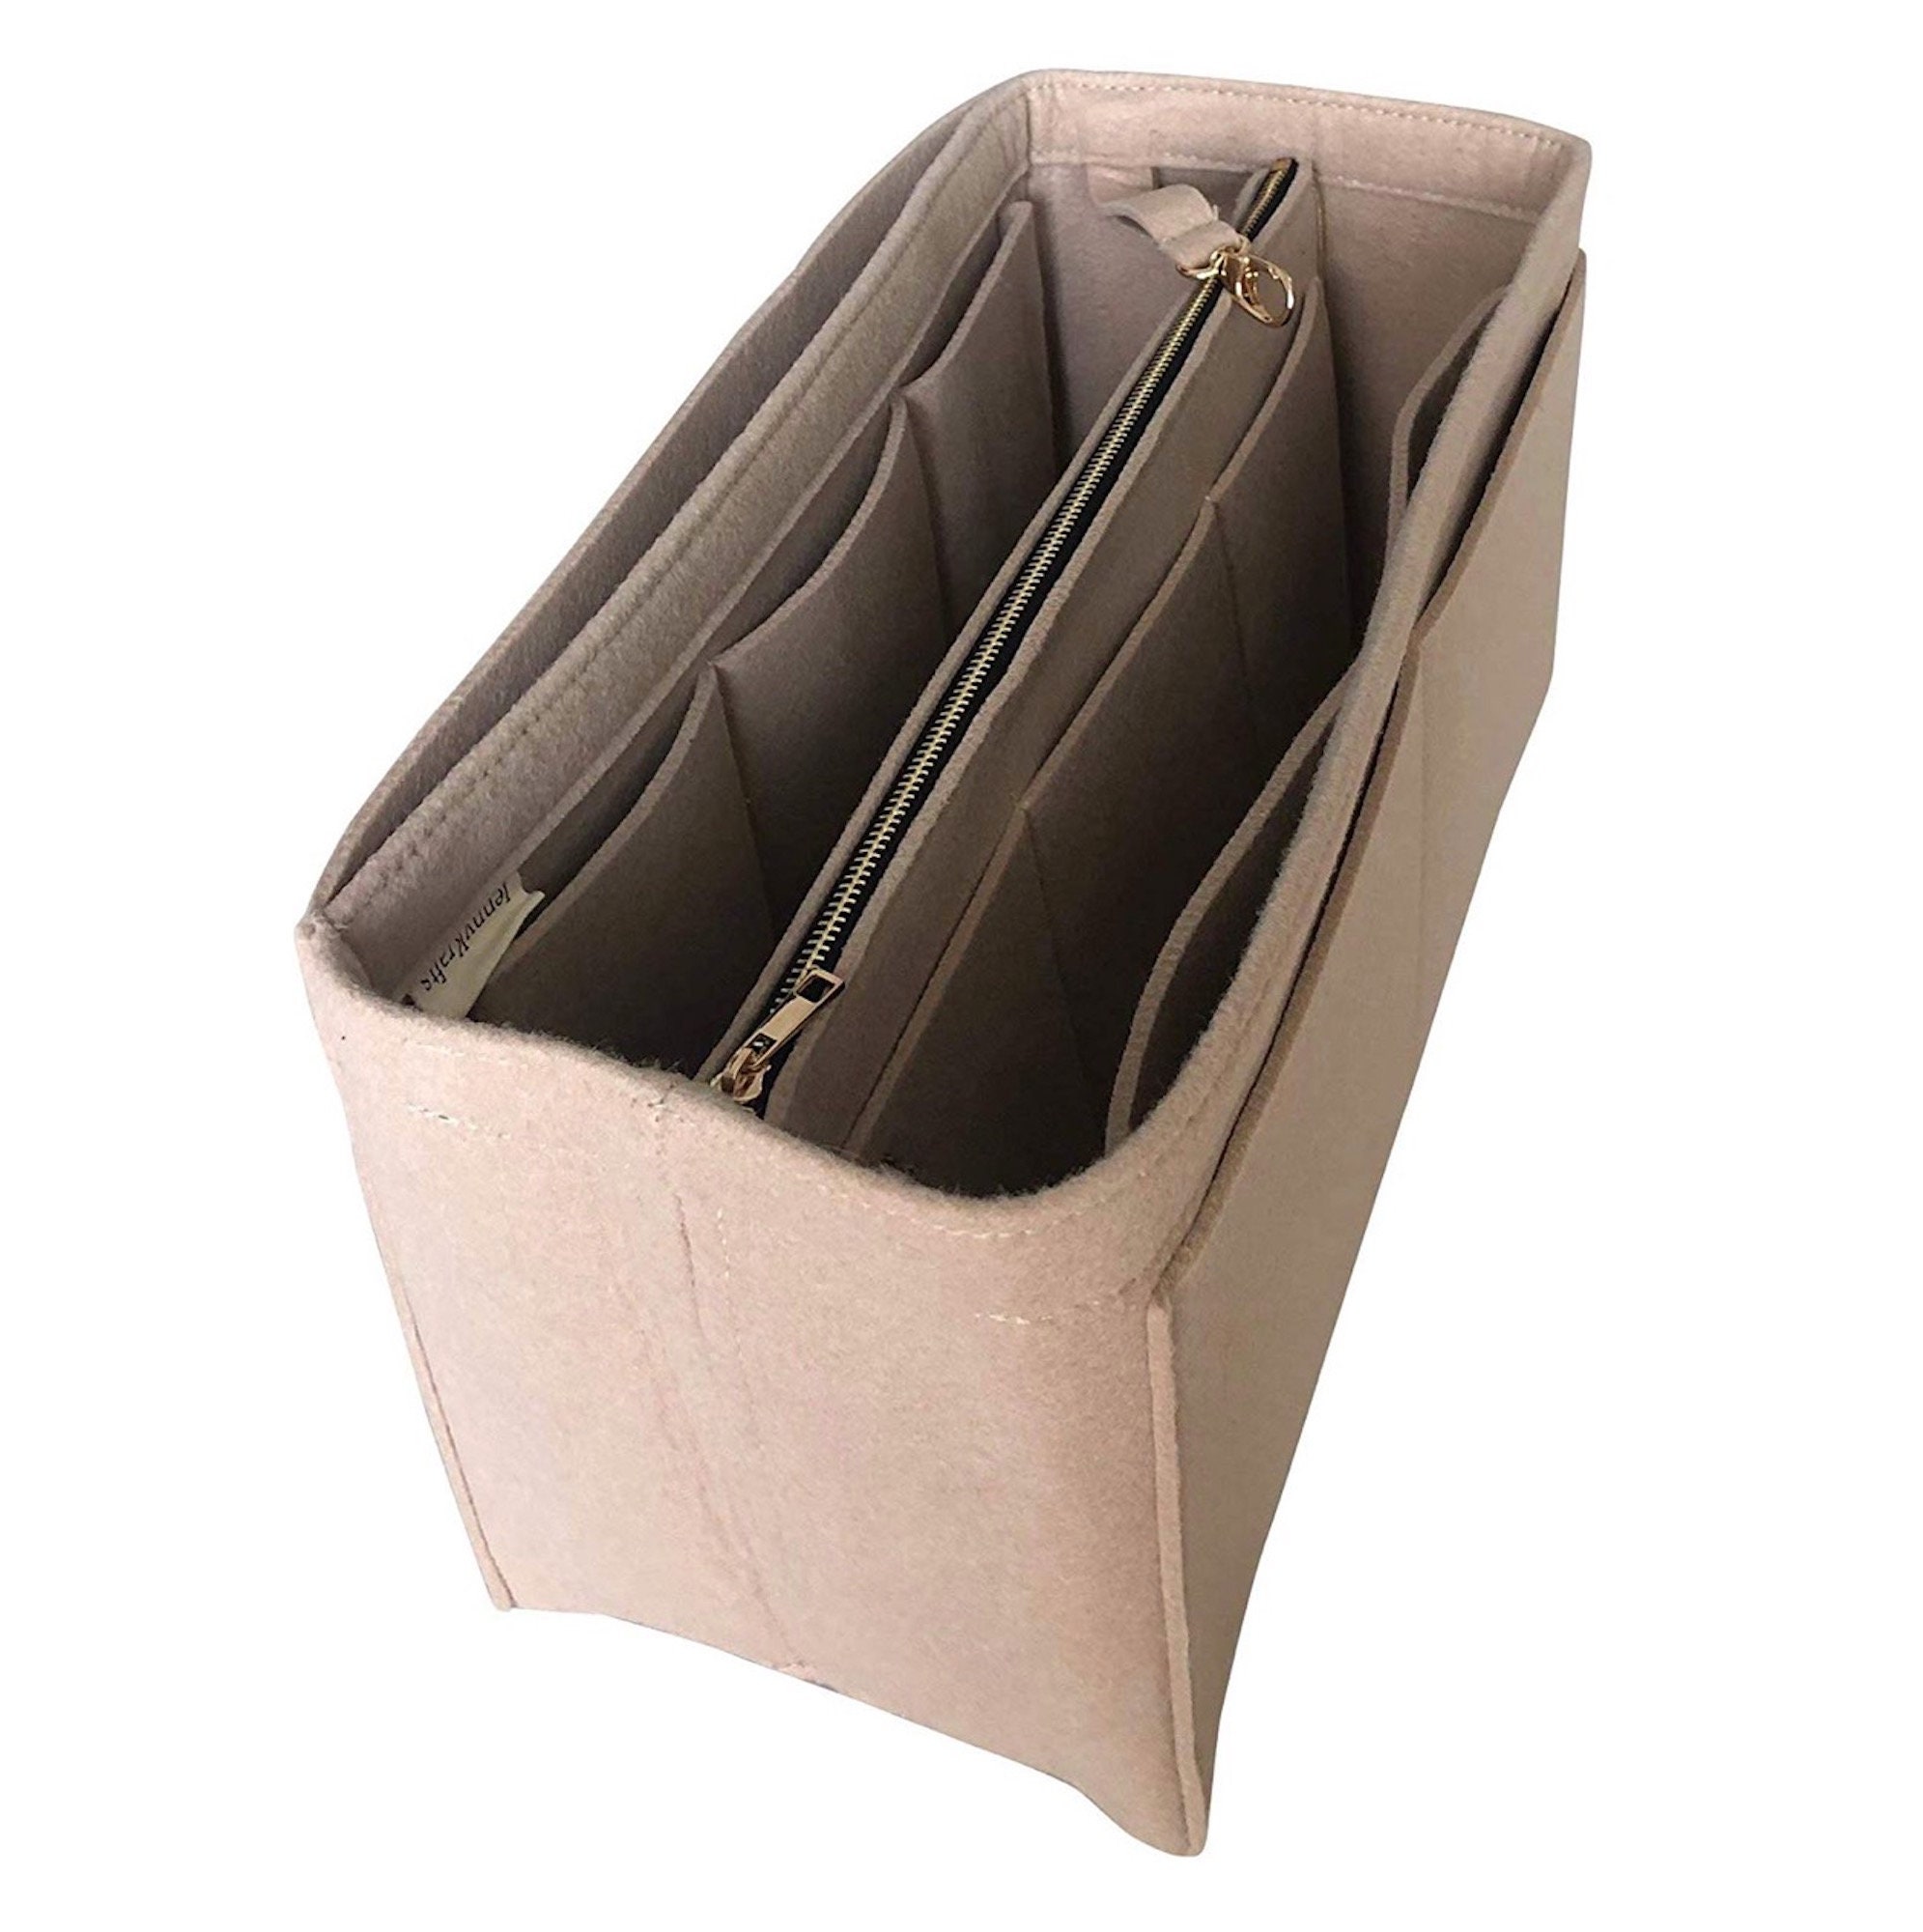 For leather Tote Bag Insert Organizer Purse -  Israel